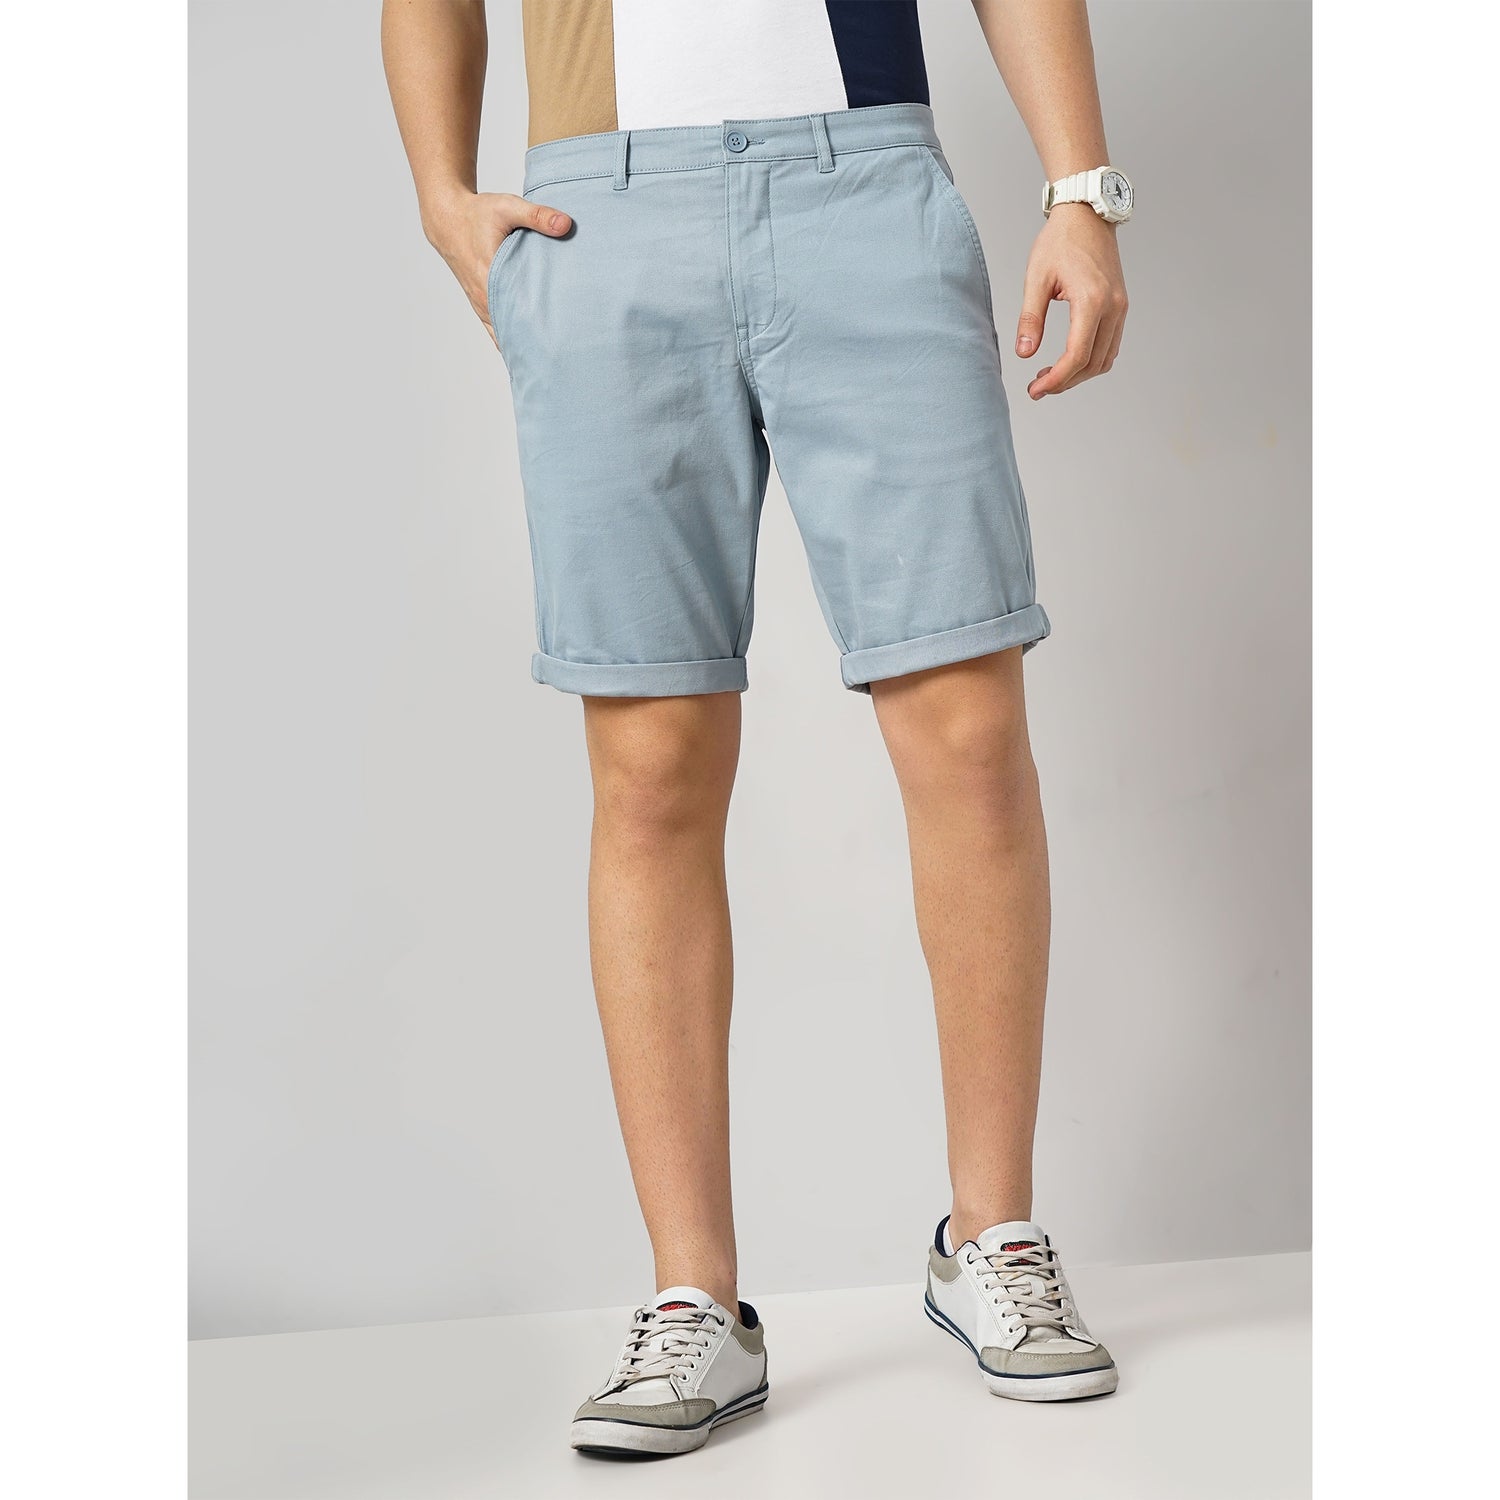 Men Blue Solid Loose Fit Cotton Chinos Casual Short (BOCHINOBM2)